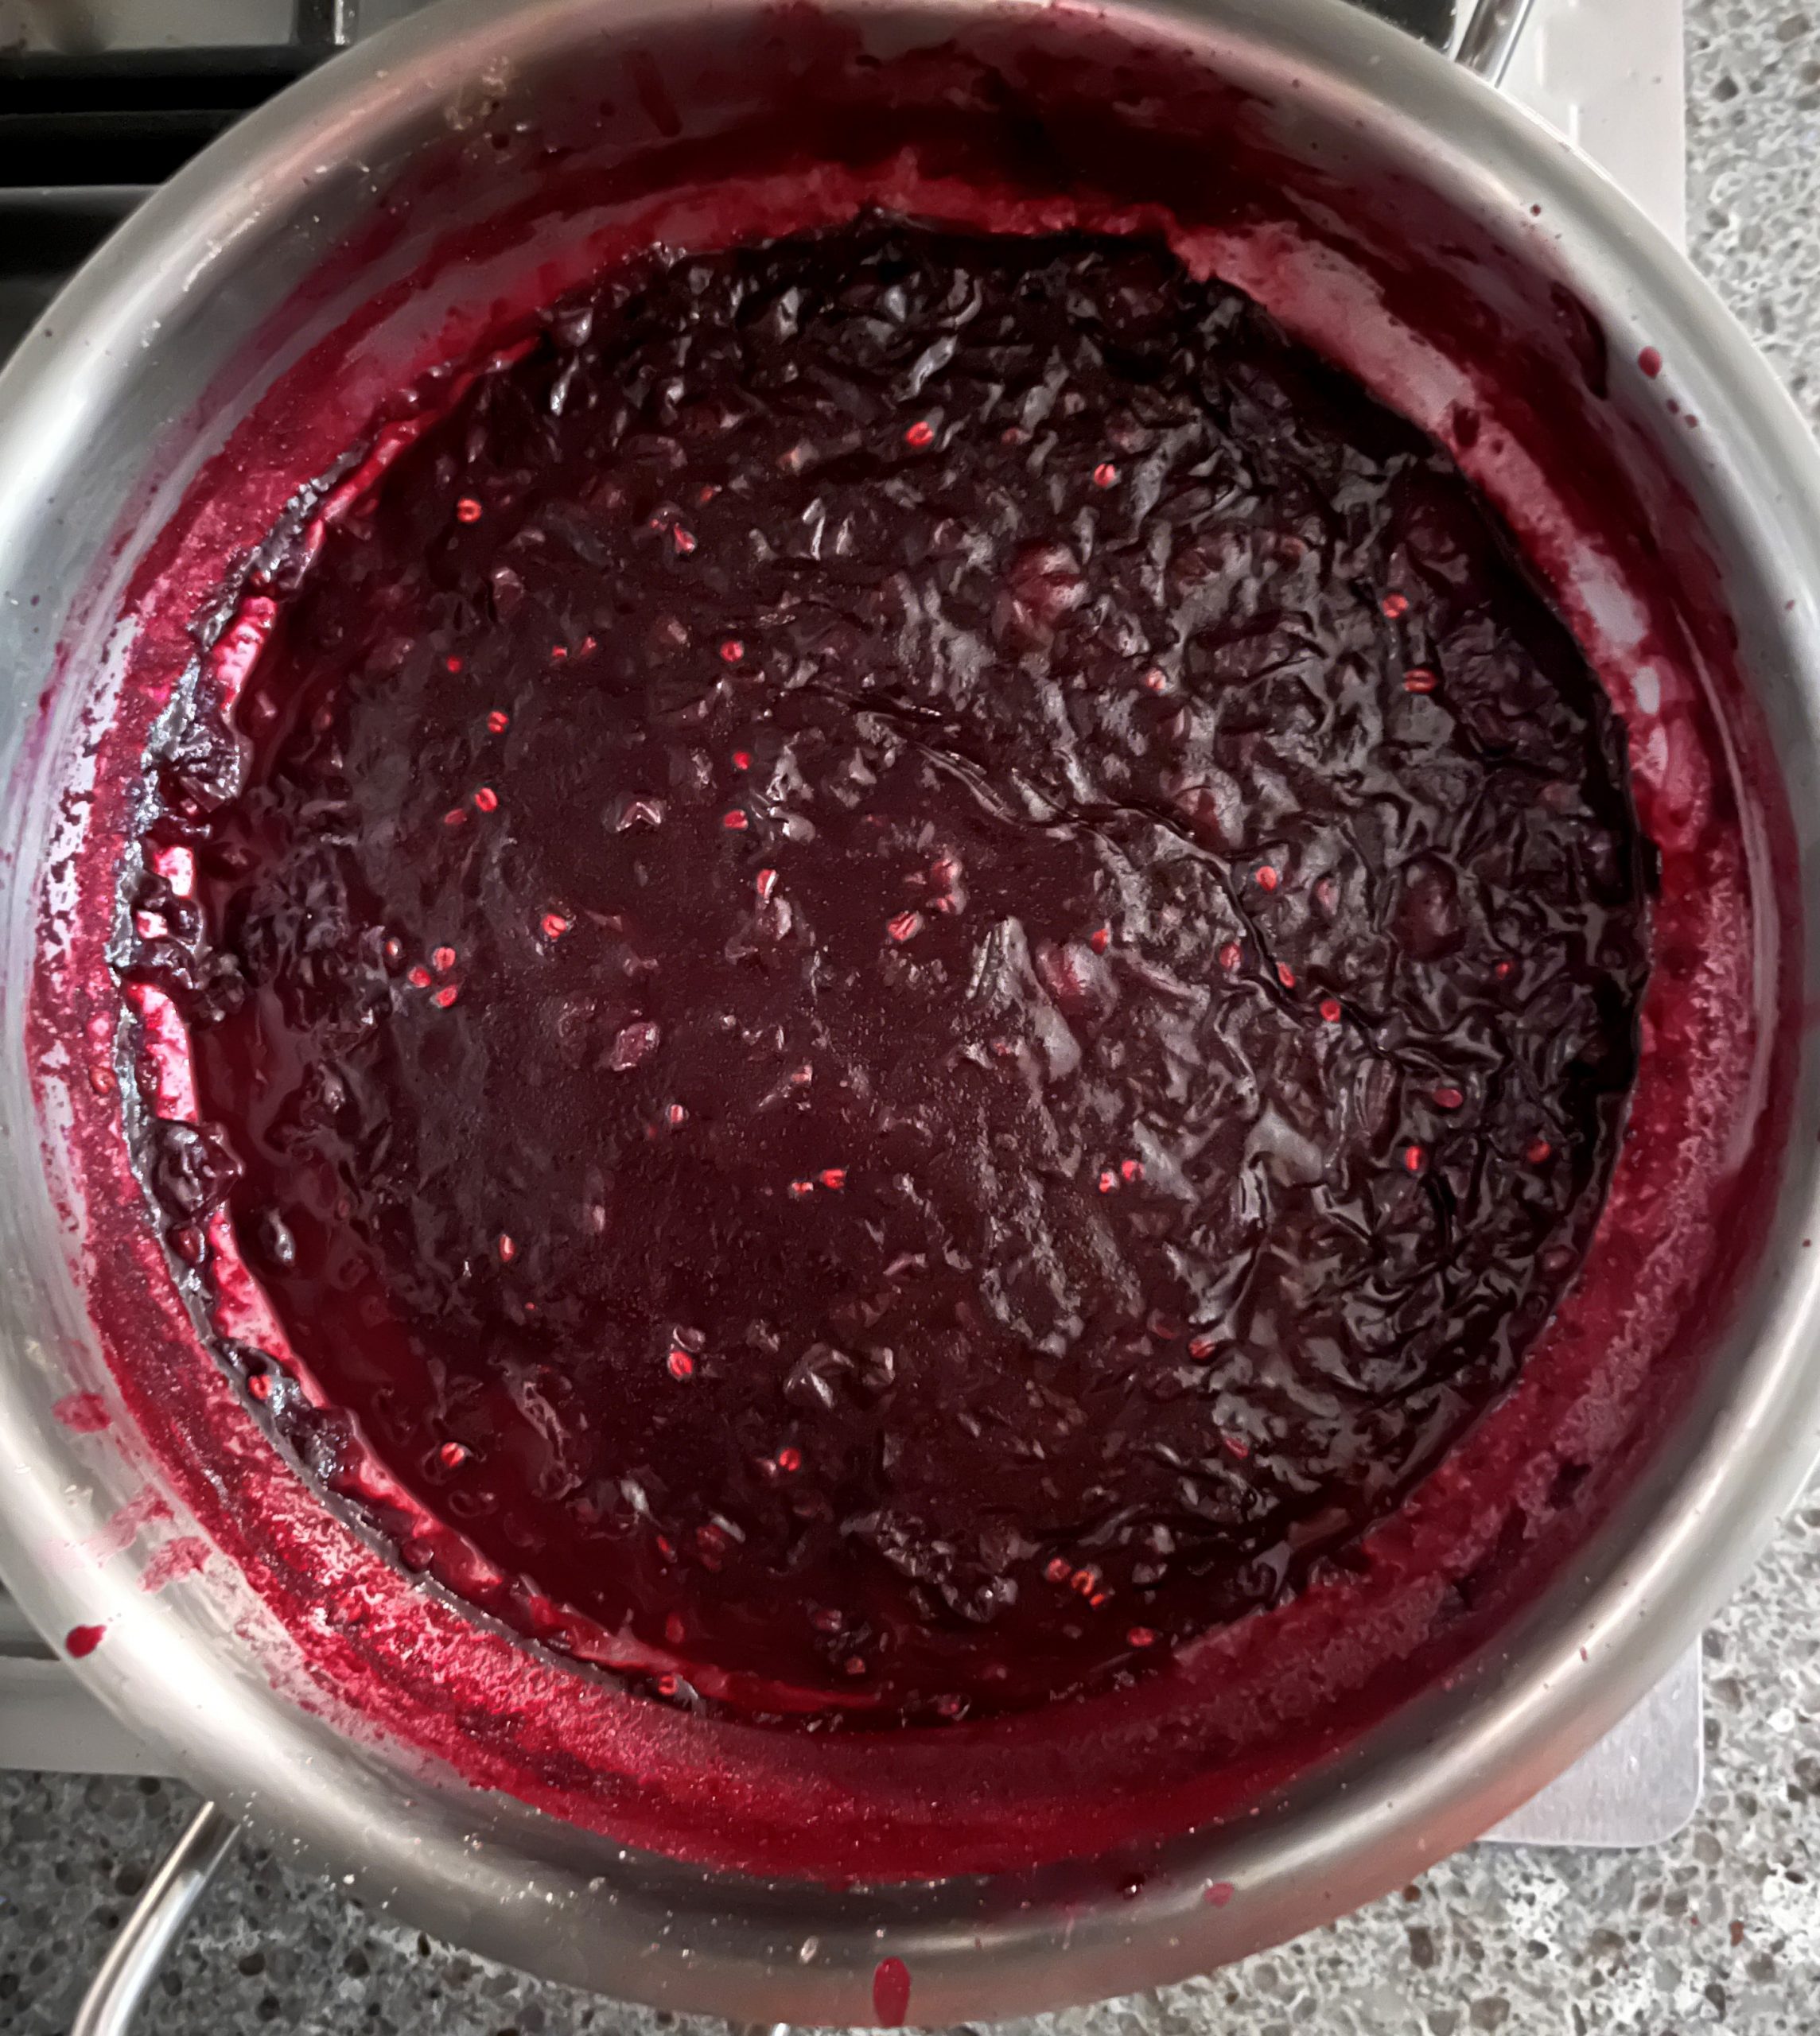 Concord Grapes Jam Recipe: simmer the jam until the grapes have softened and become mushy